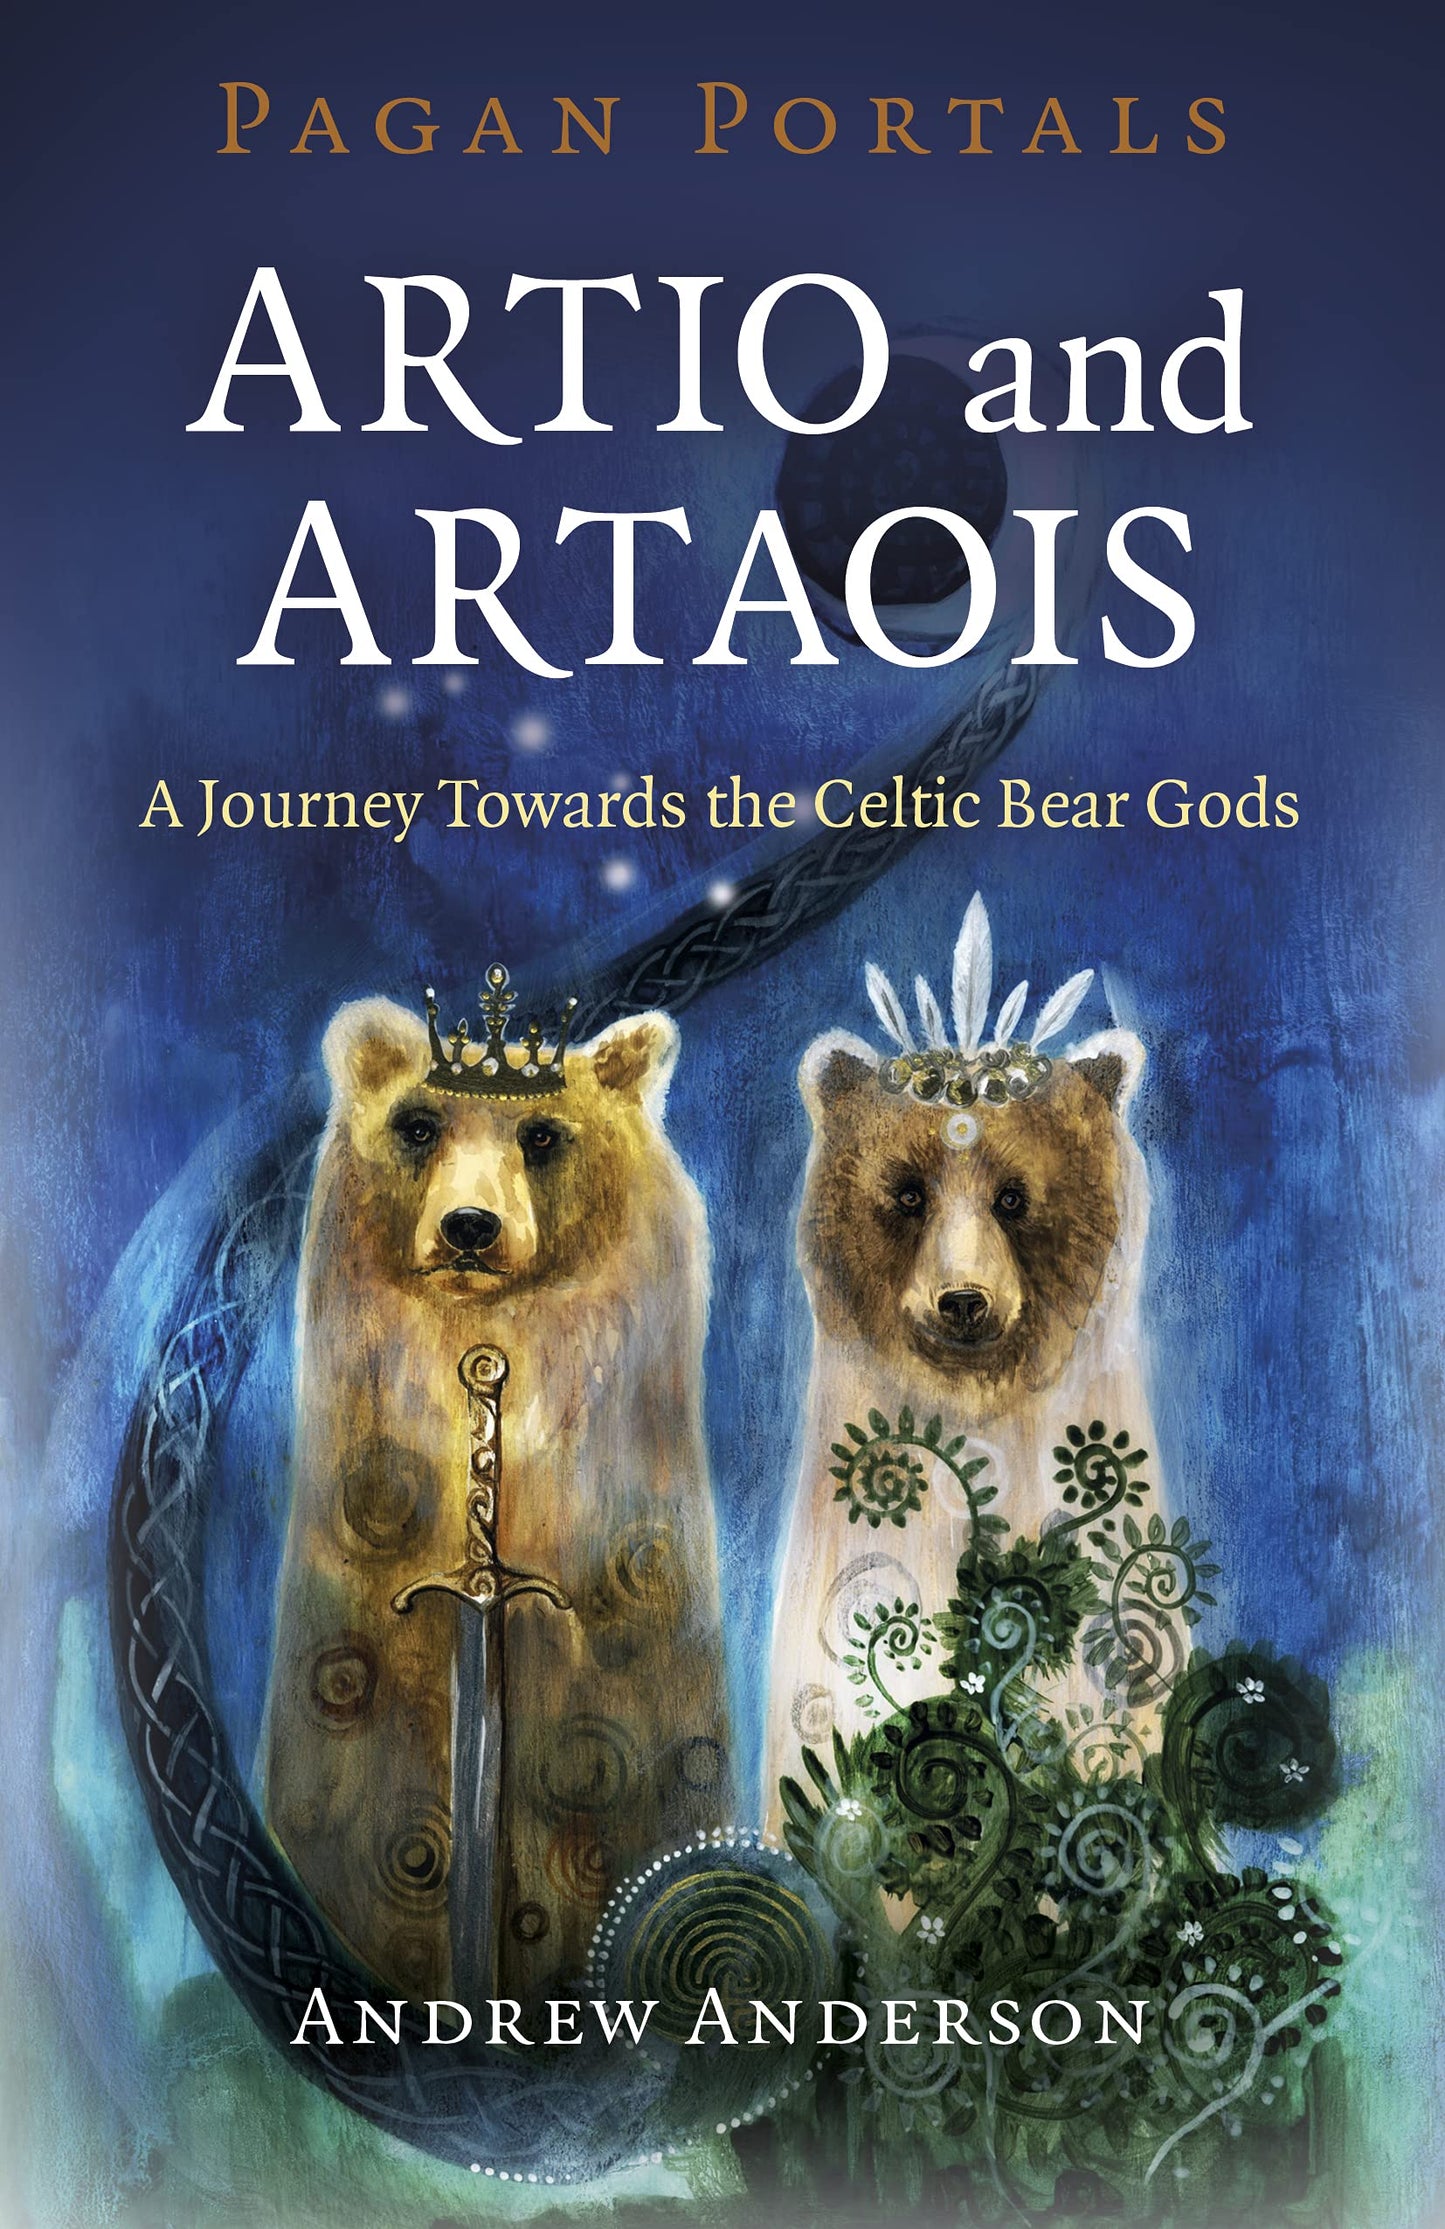 Artio and Artaois | A journey towards the Celtic Bear Gods by Andrew Anderson